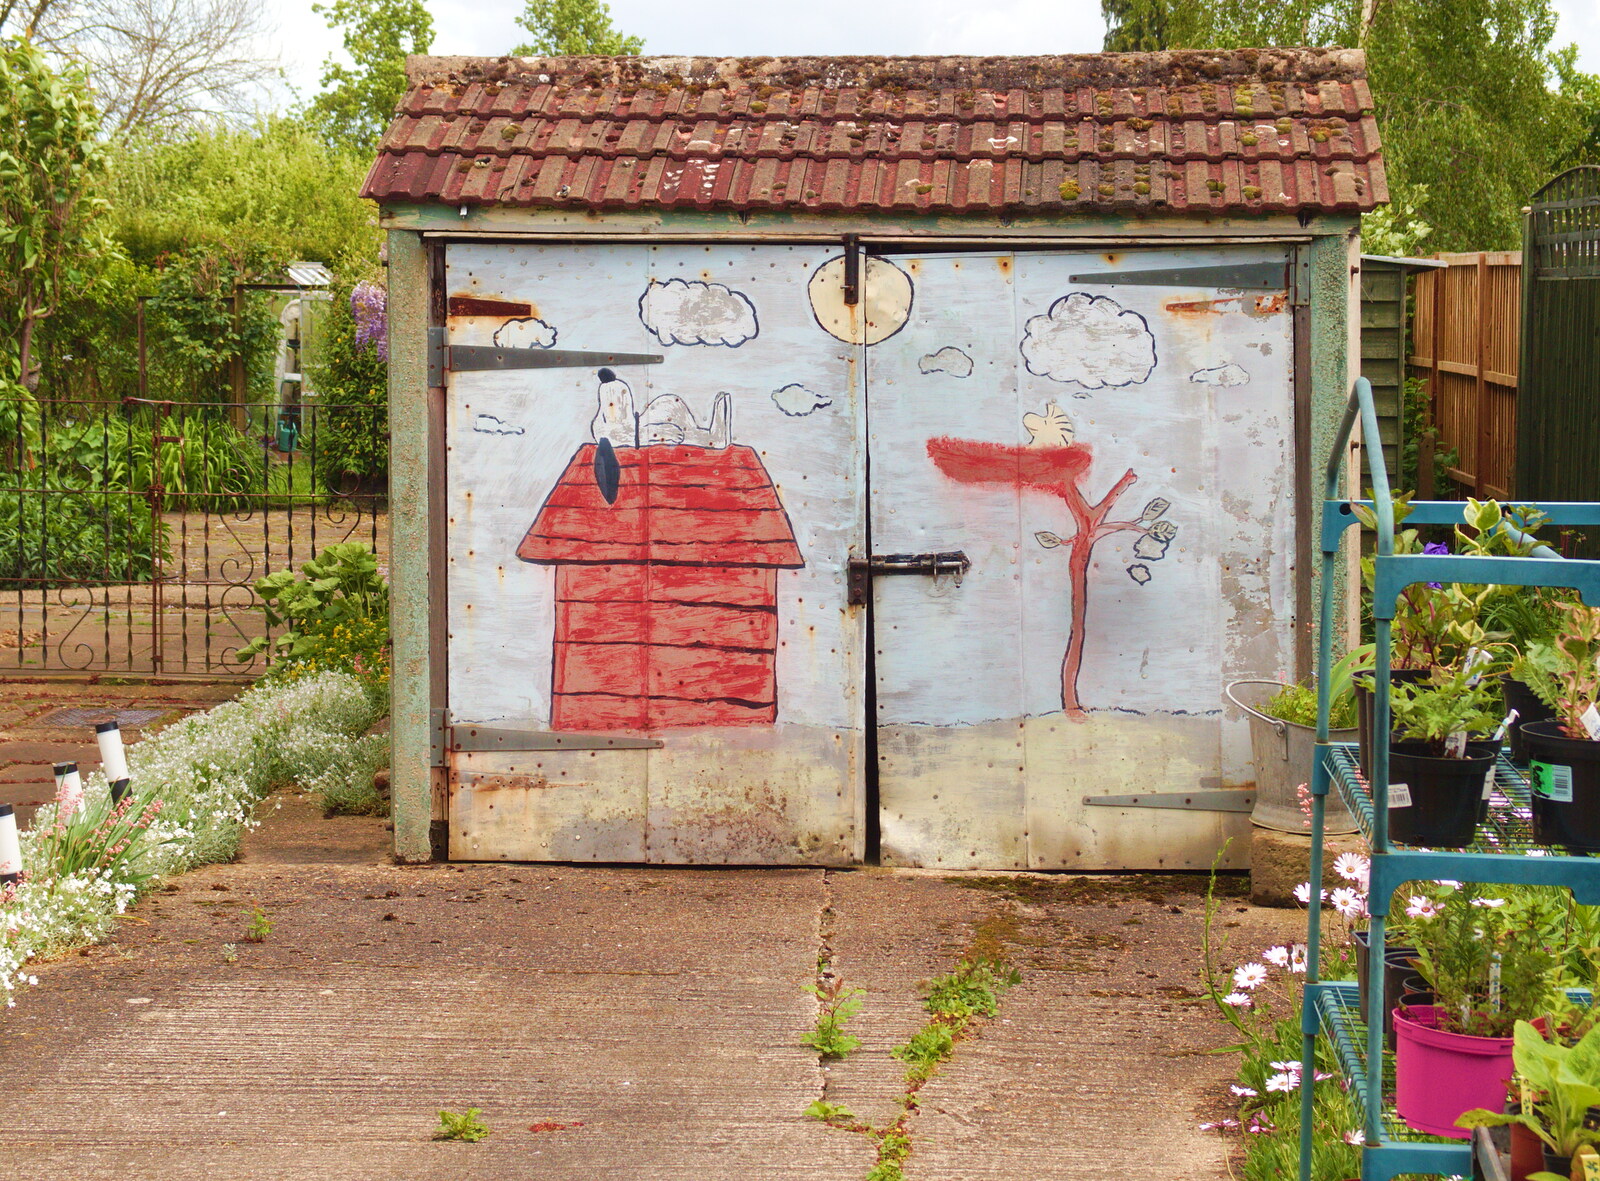 Snoopy and Woodstock on a ramshackle garage door from A Return to Bedford: the BSCC Annual Weekend Away, Shefford, Bedfordshire - 10th May 2014